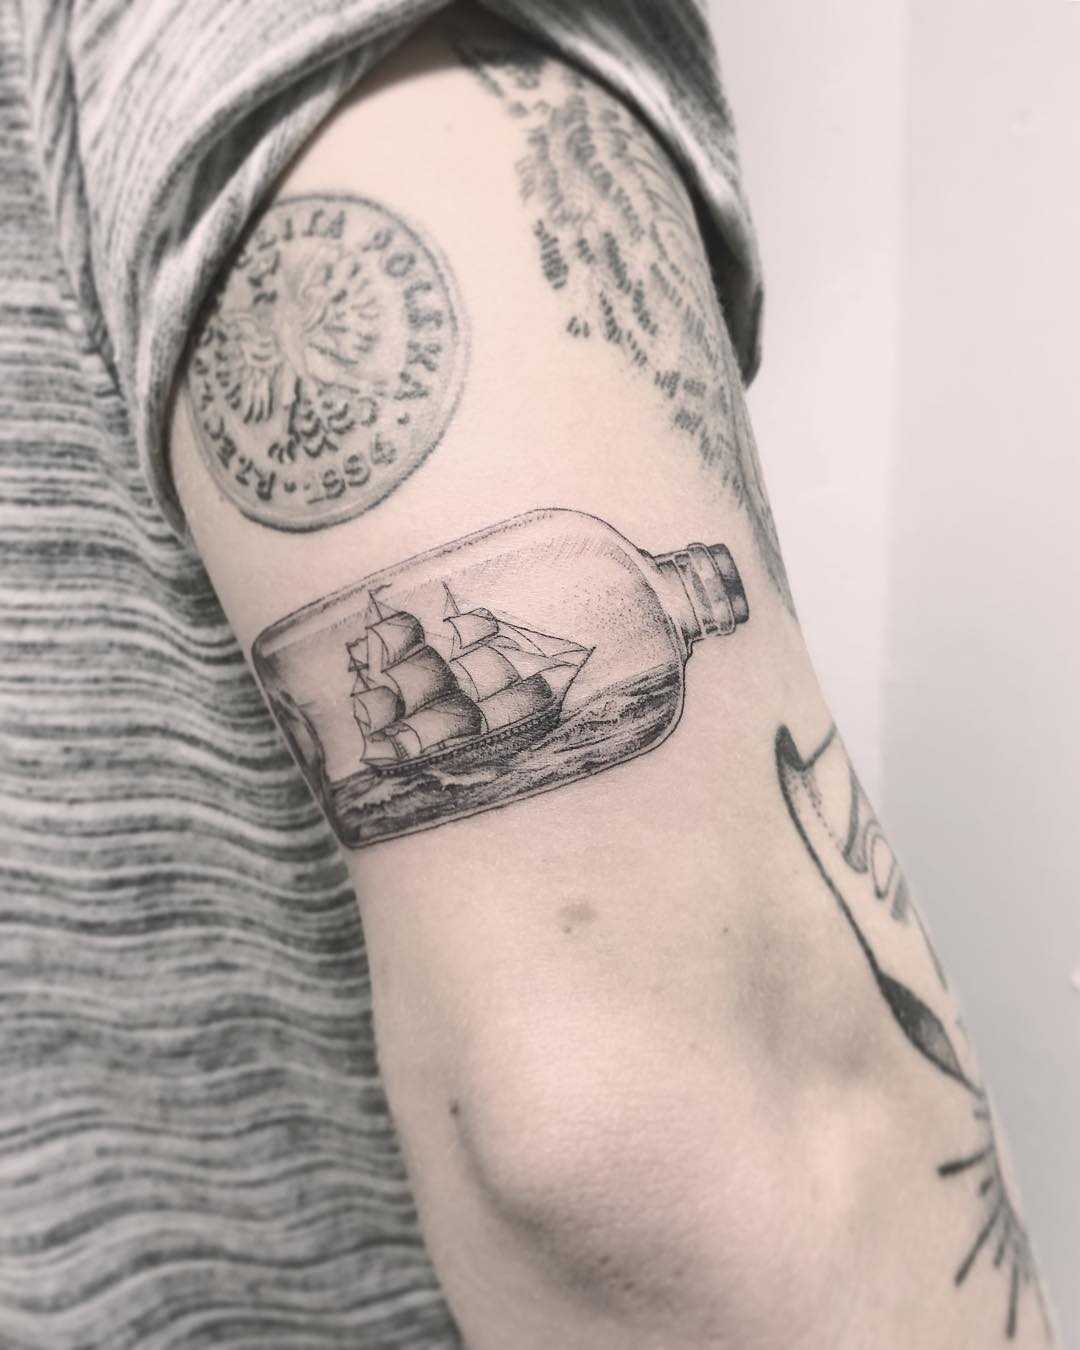 Bottle ship tattoo by Annelie Fransson